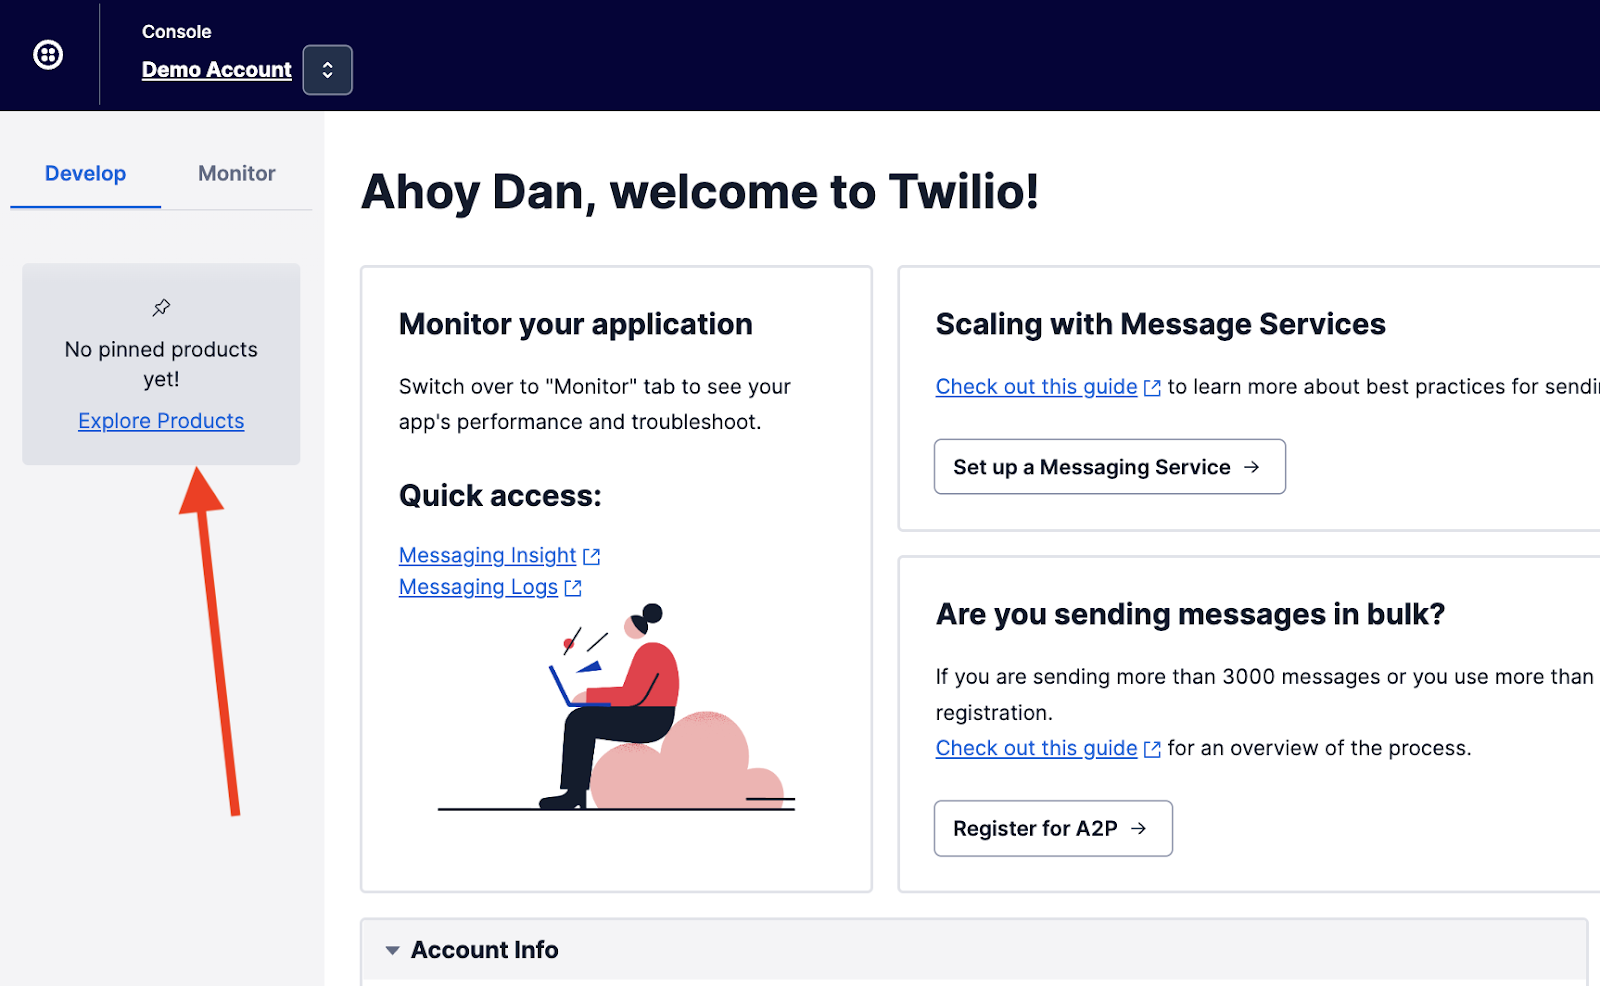 Explore Products in the Twilio Console